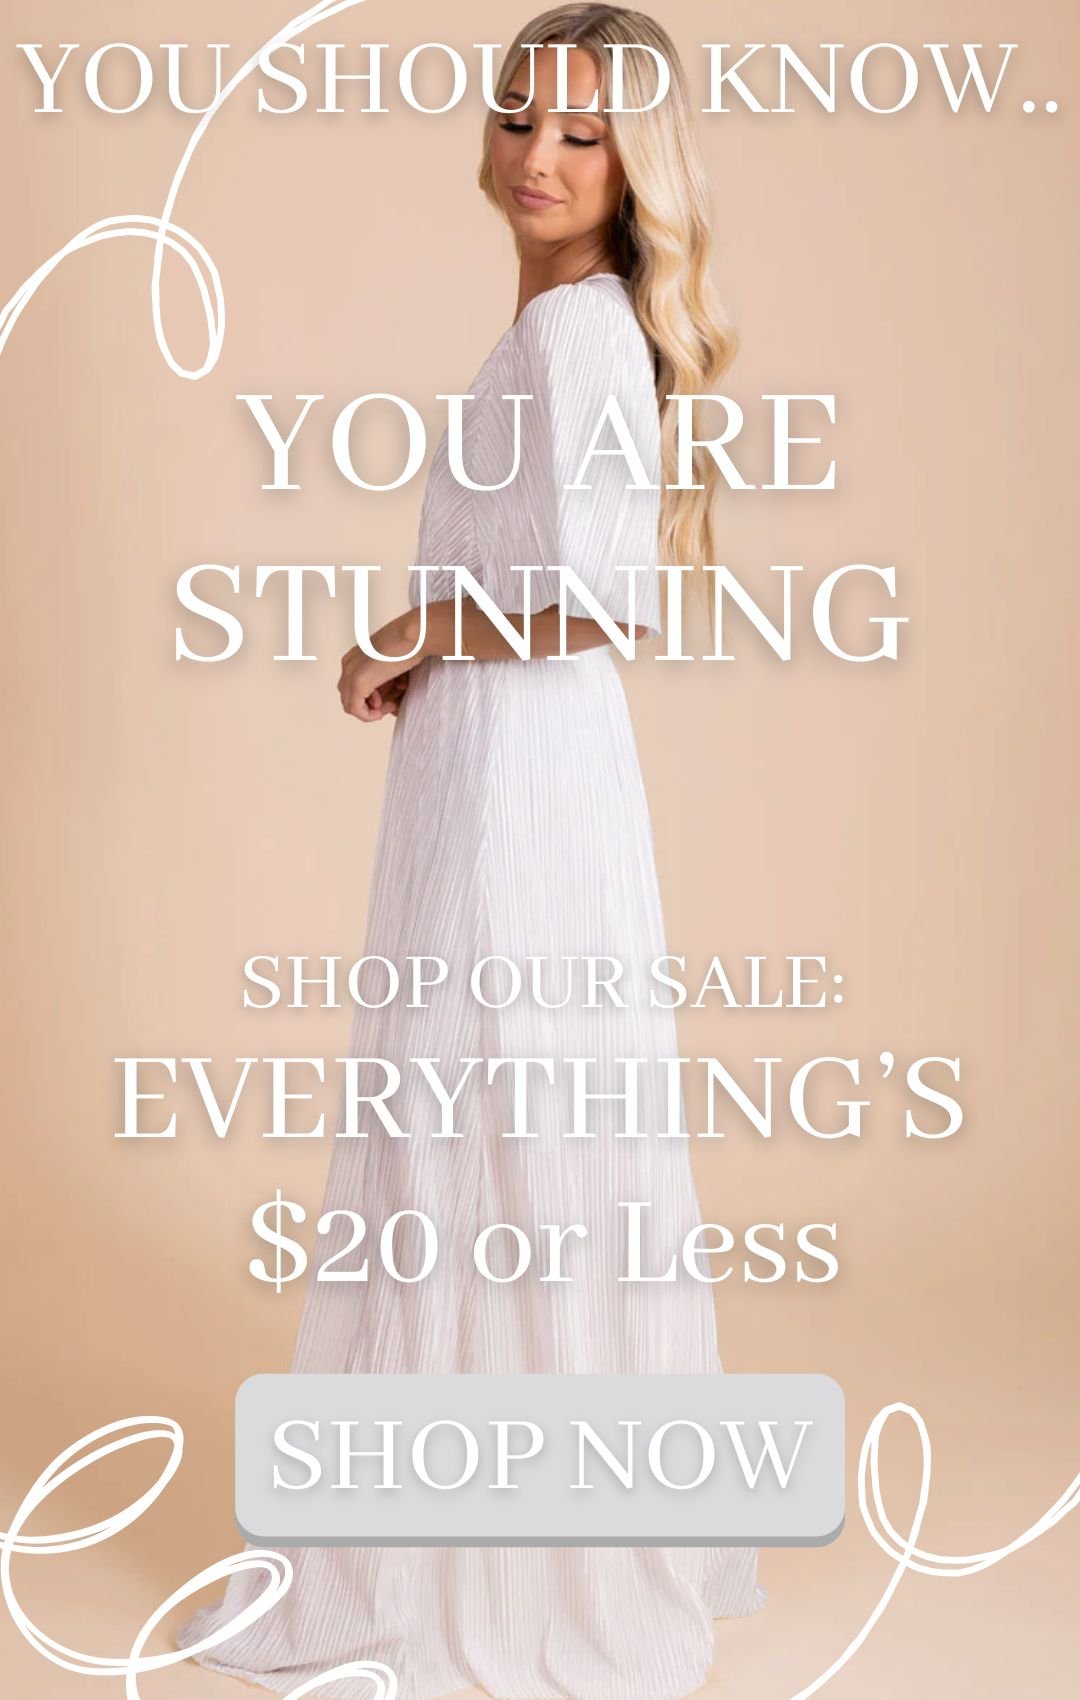 There is a woman in a white floor length dress with shiny ribbed fabric and elbow length sleeves. The background is tan and there are white squiggles and text that says you should know you are stunning. More text says shop our sale, everythings twenty dollars or less. There is a grey button that says shop now.